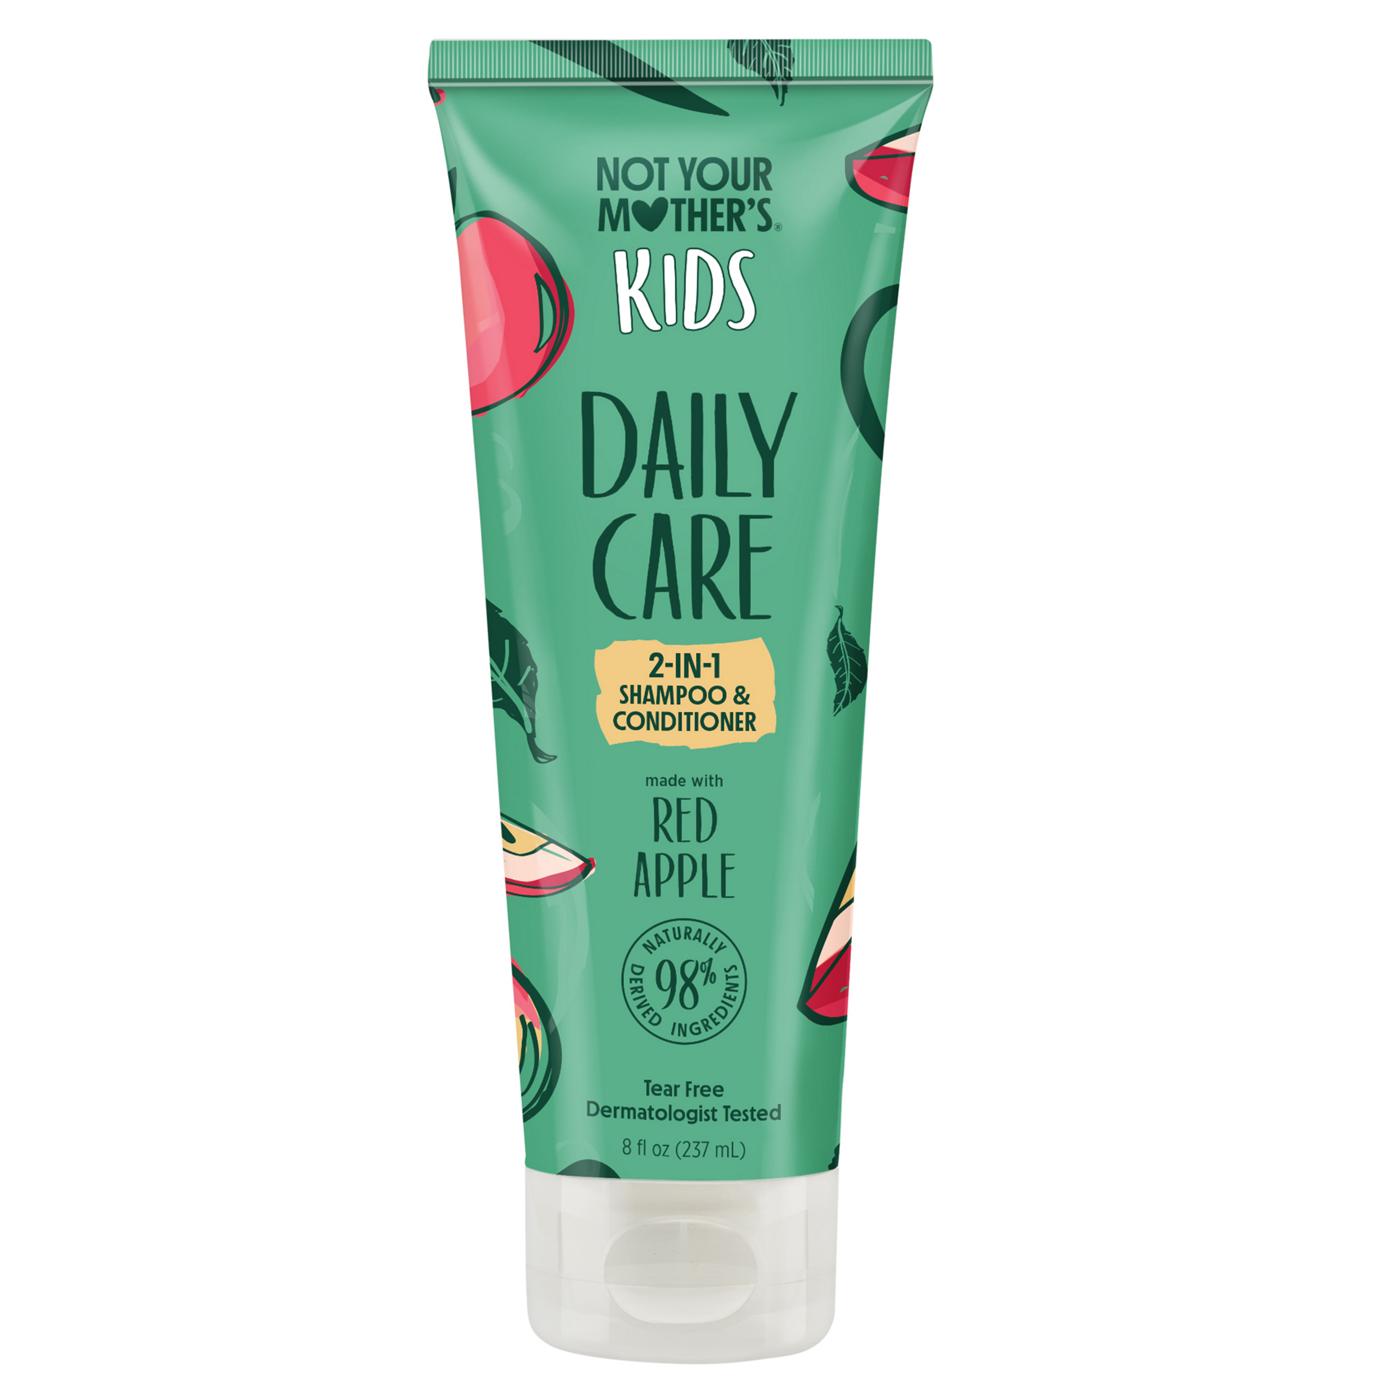 Not Your Mother's Kids Tear Free 2-In-1 Shampoo & Conditioner; image 1 of 2